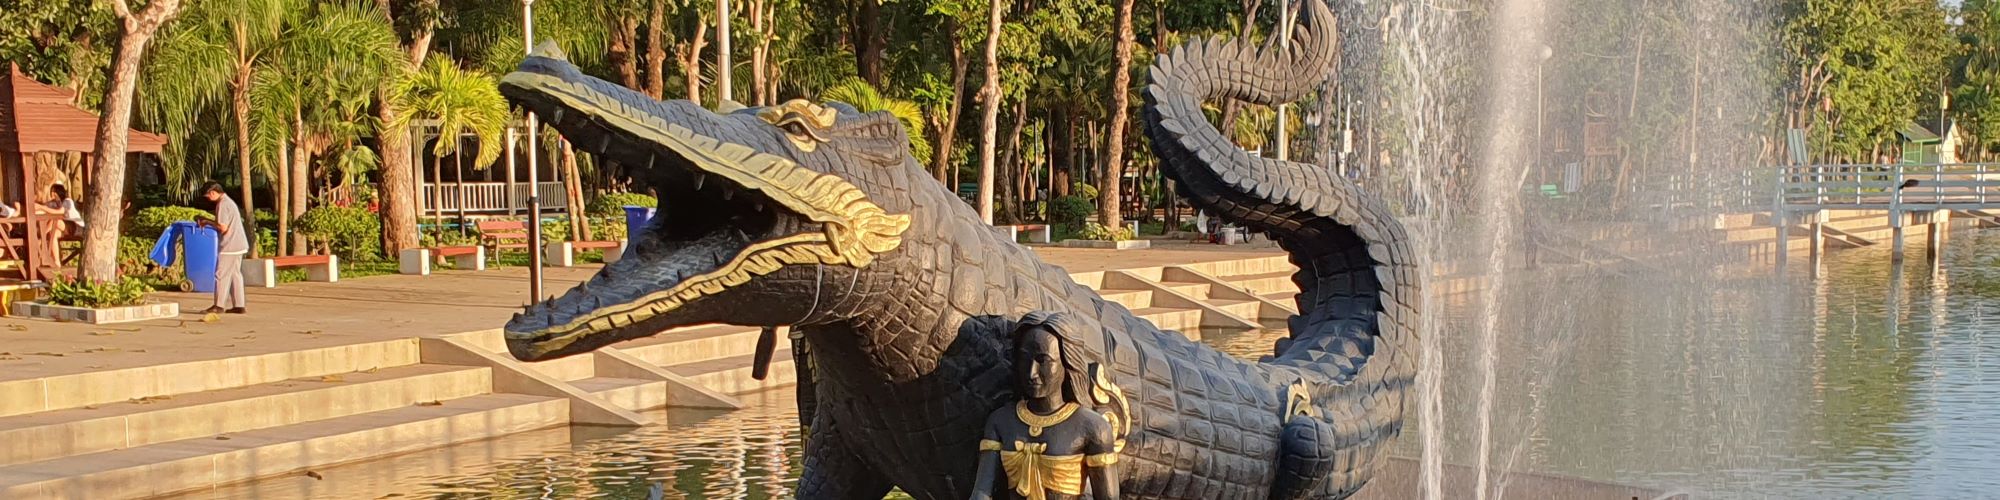 Water Feature, Bueng Si Fai, Tha Luang, Mueang Phichit District, Phichit Province